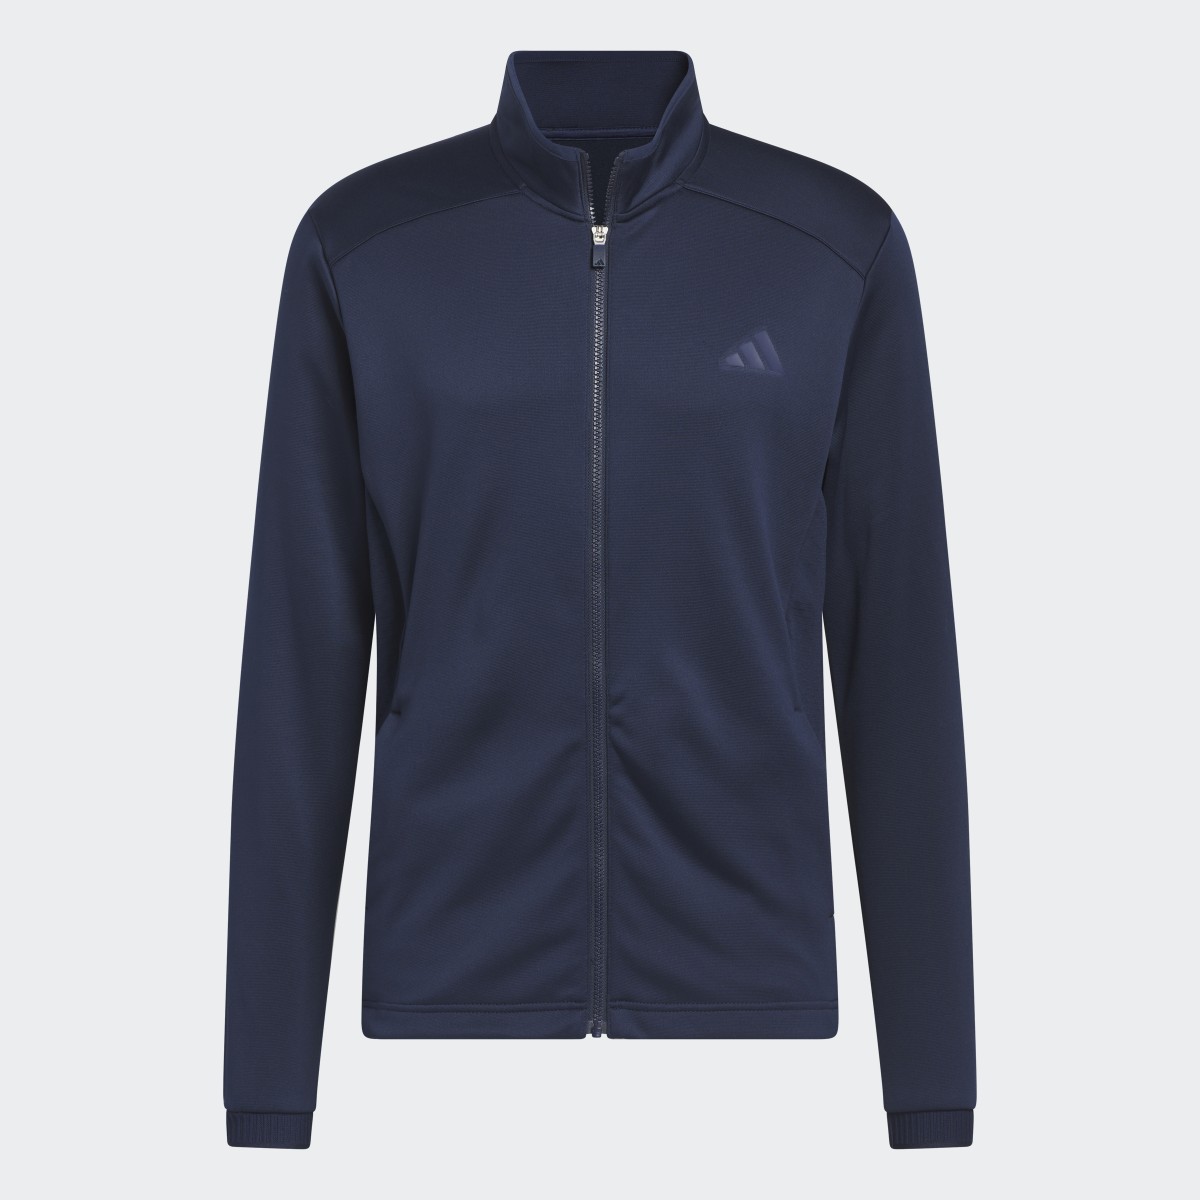 Adidas COLD.RDY Full-Zip Jacket. 5